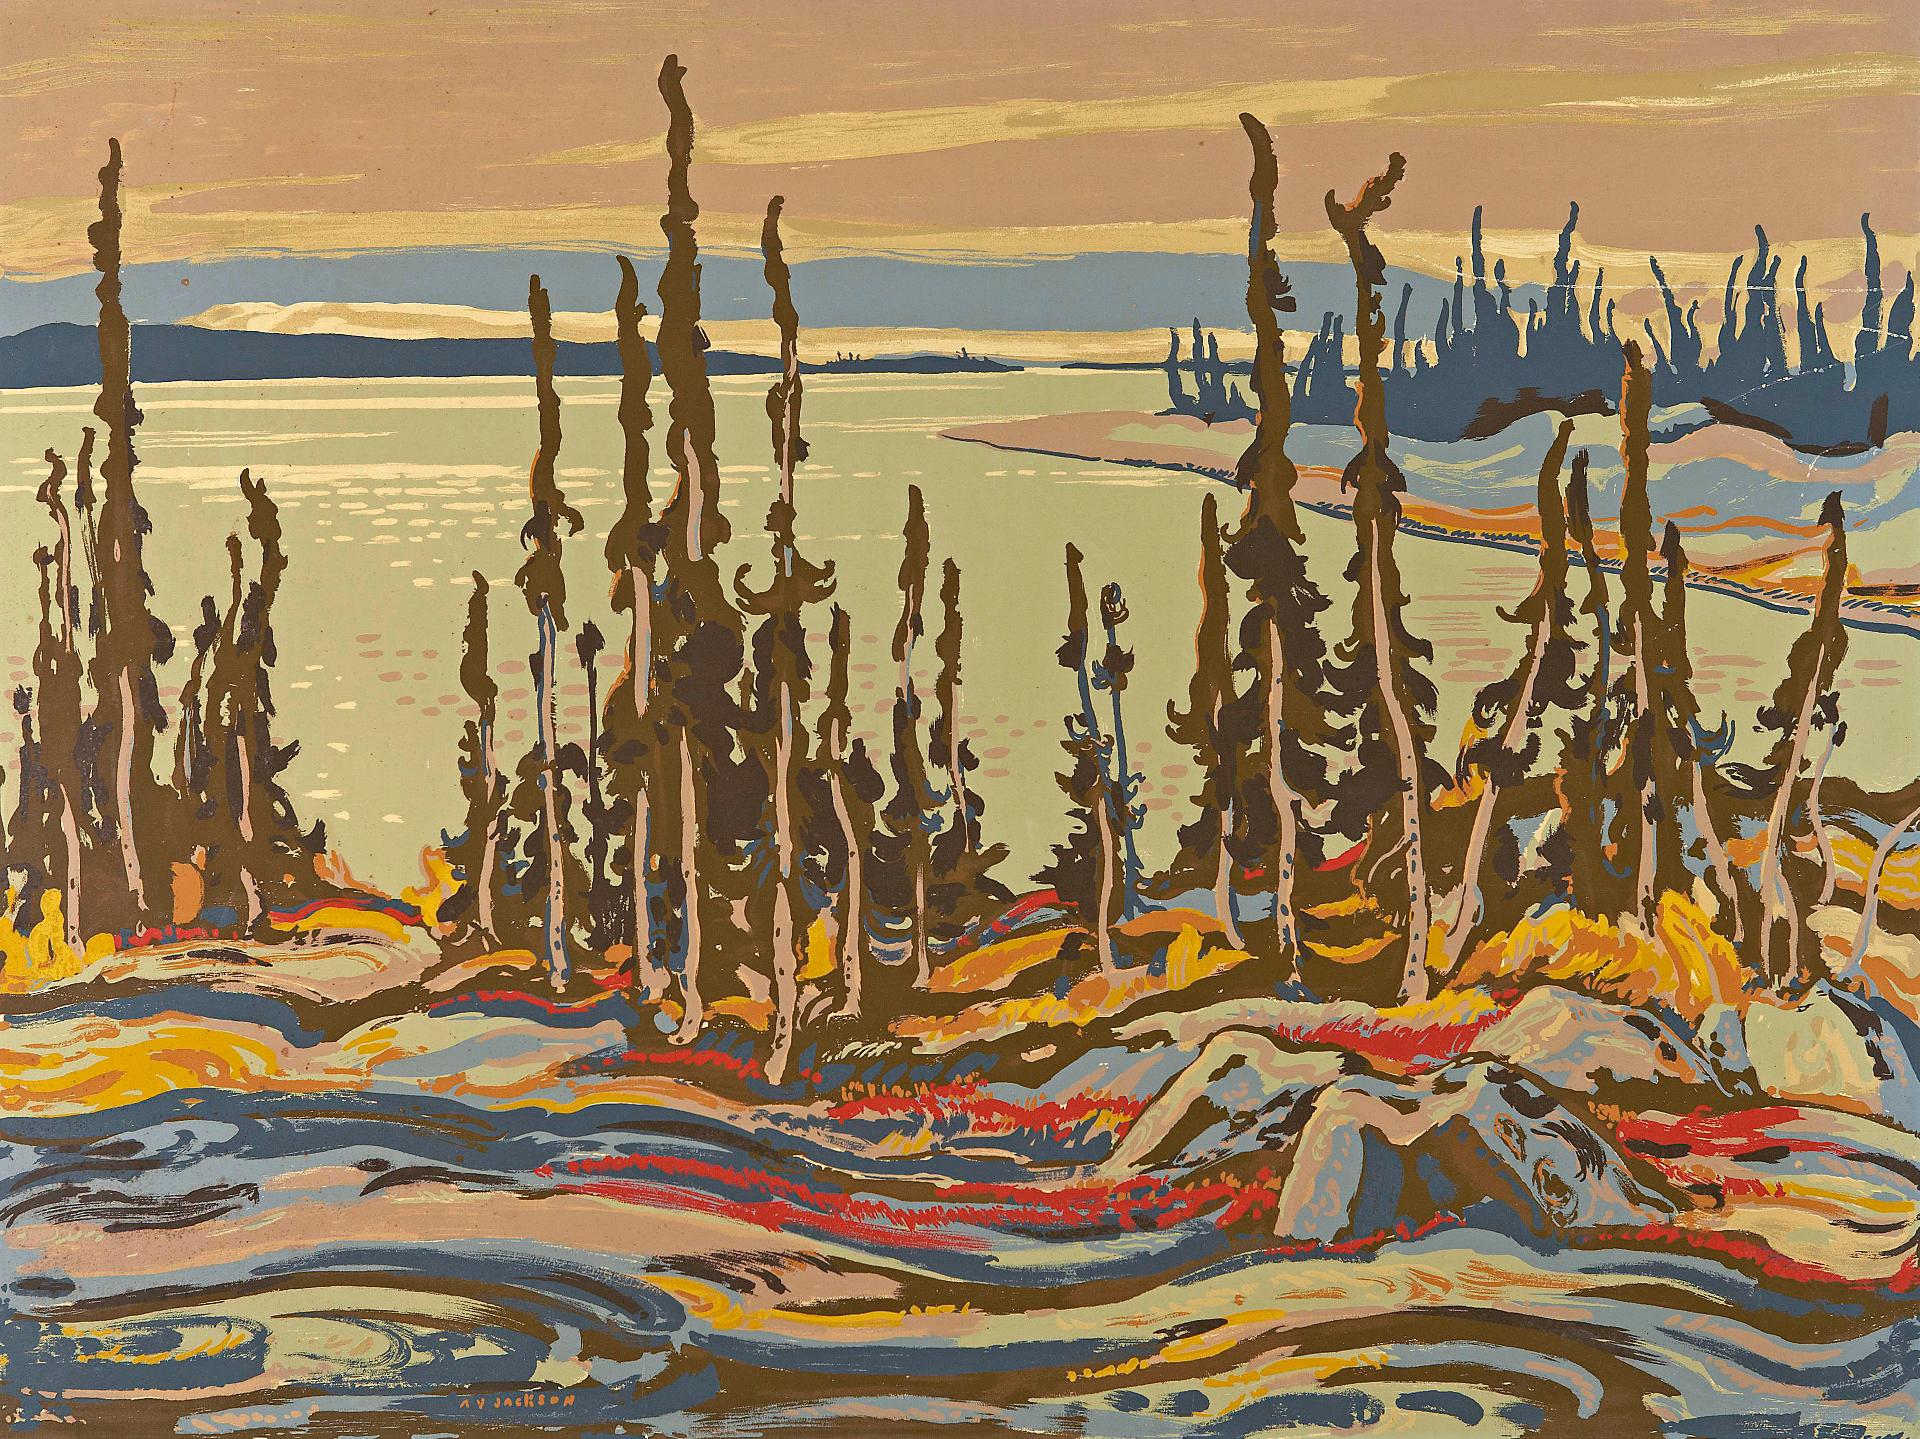 Alexander Young (A. Y.) Jackson (1882-1974) - Deese Bay, Great Bear Lake